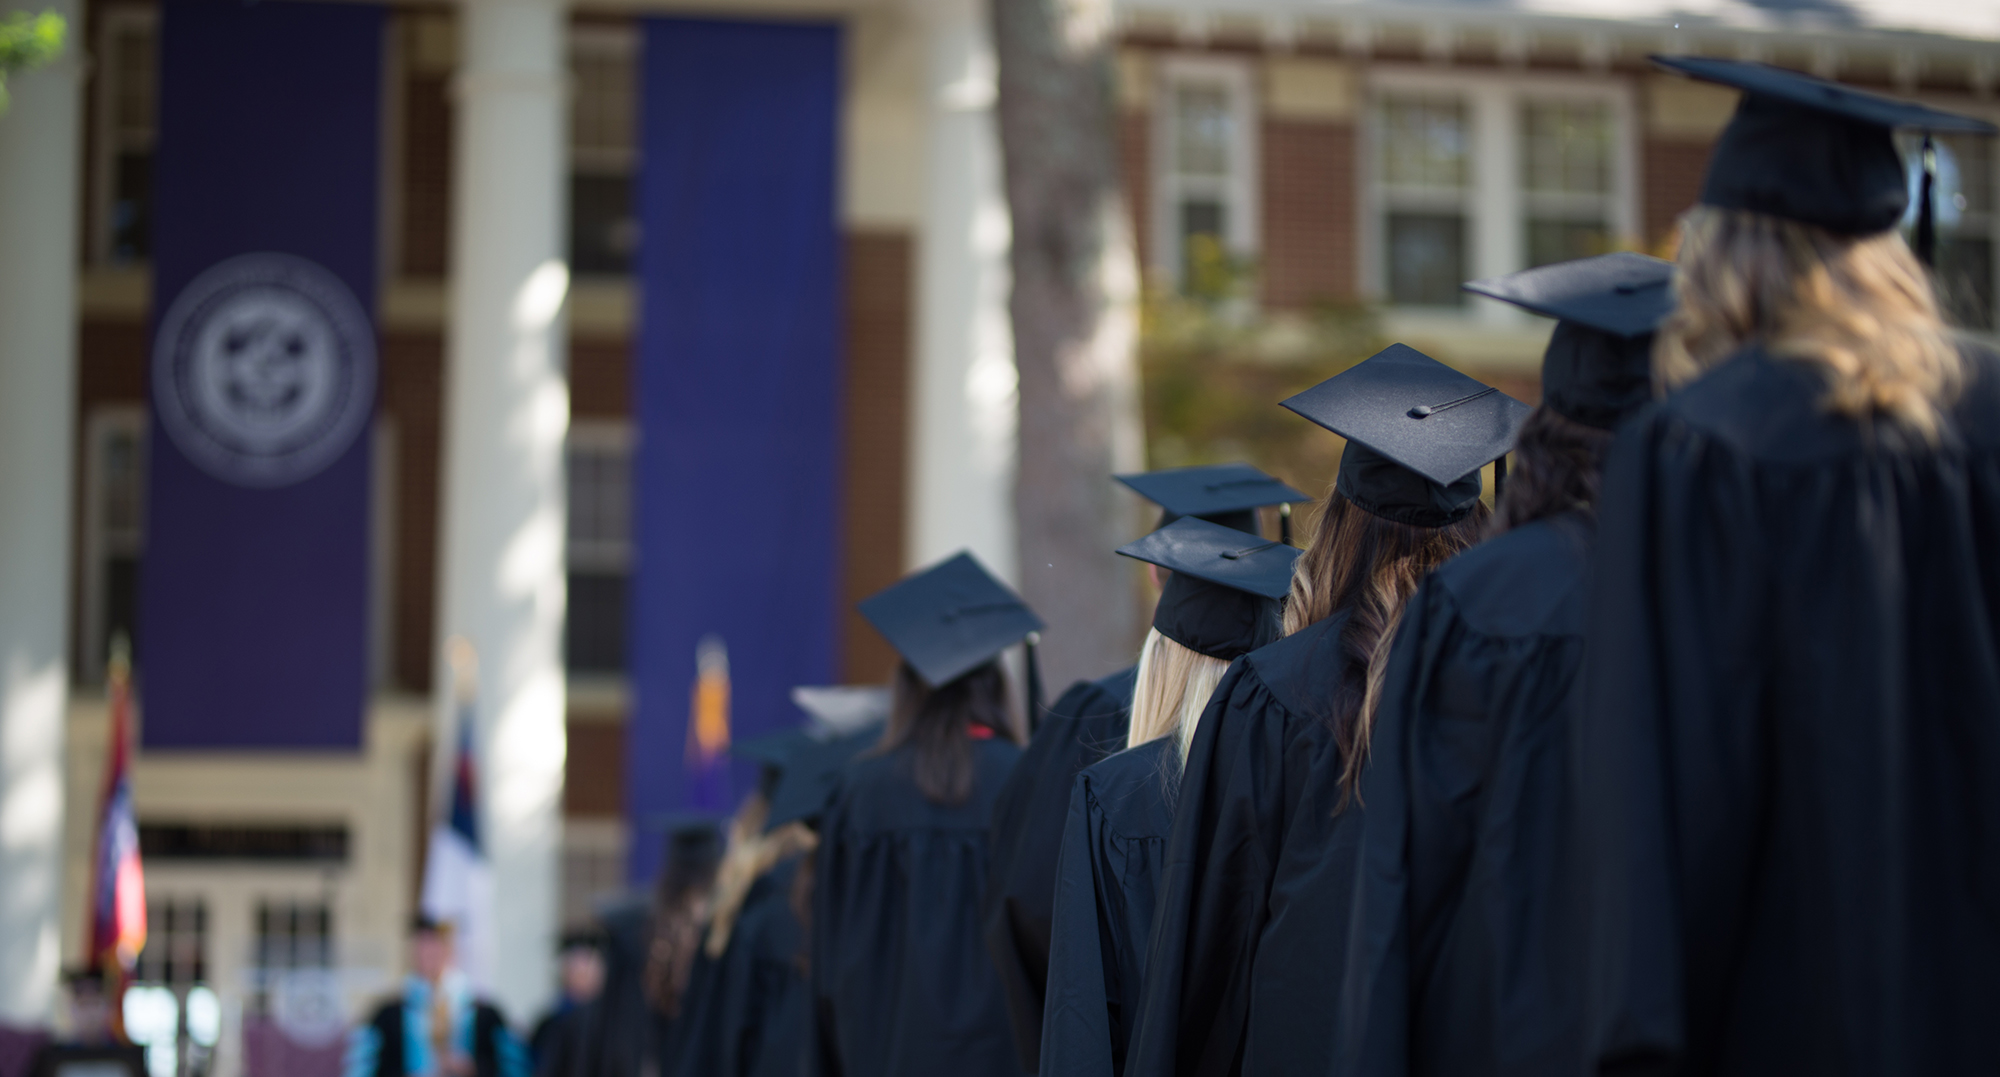 Ouachita achieves top graduation rate among all colleges in Arkansas.